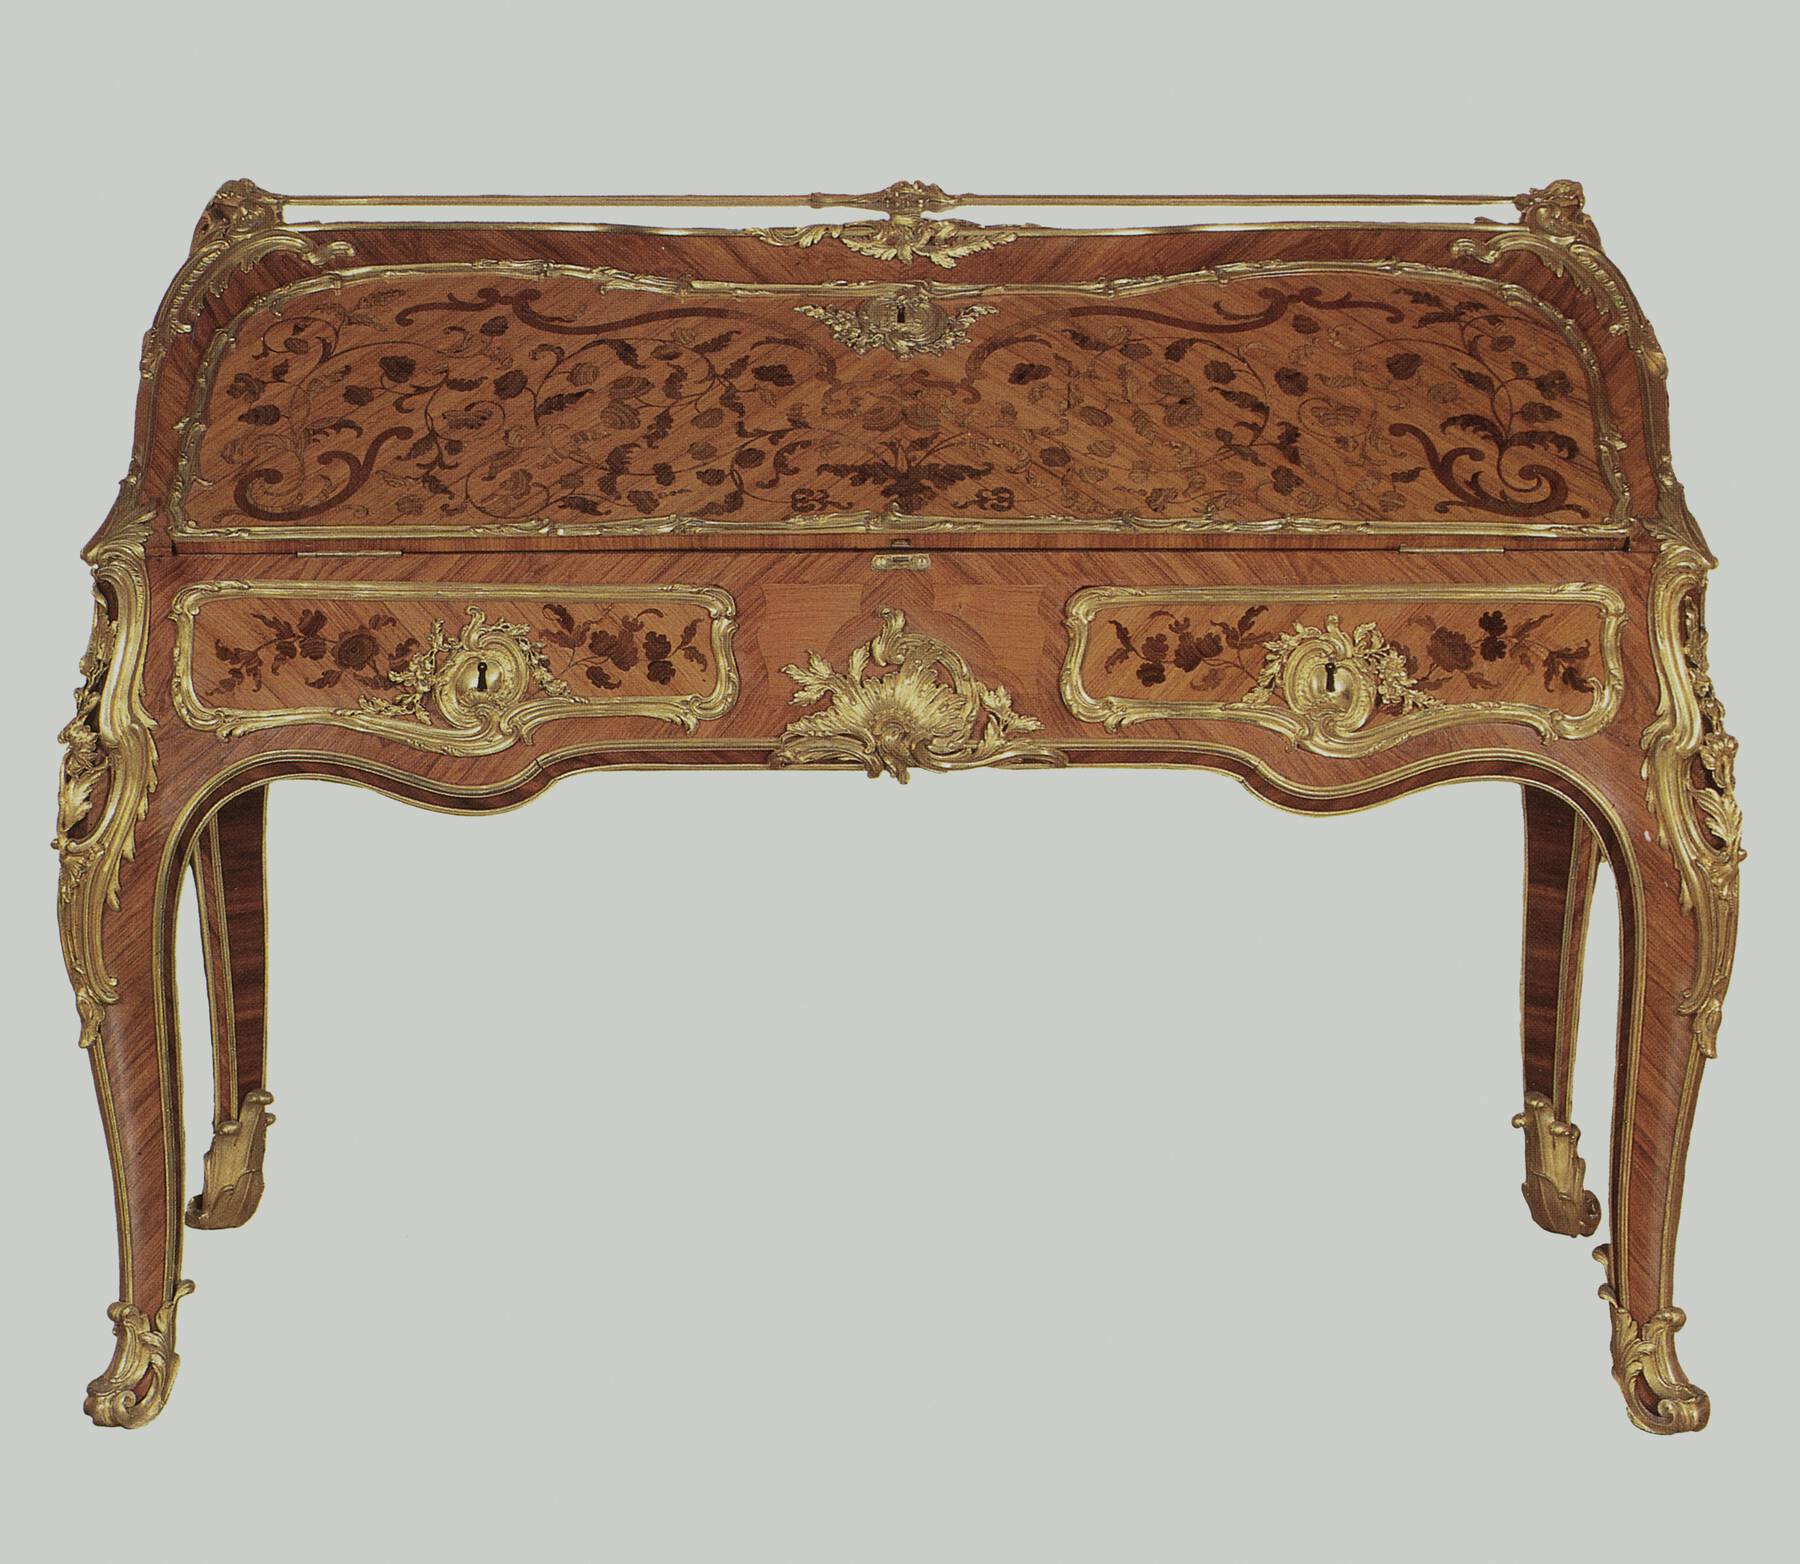 an additional desk, decorated with floral marquetry, veneer, and gilt bronze mounts in a similar style to the Getty desk